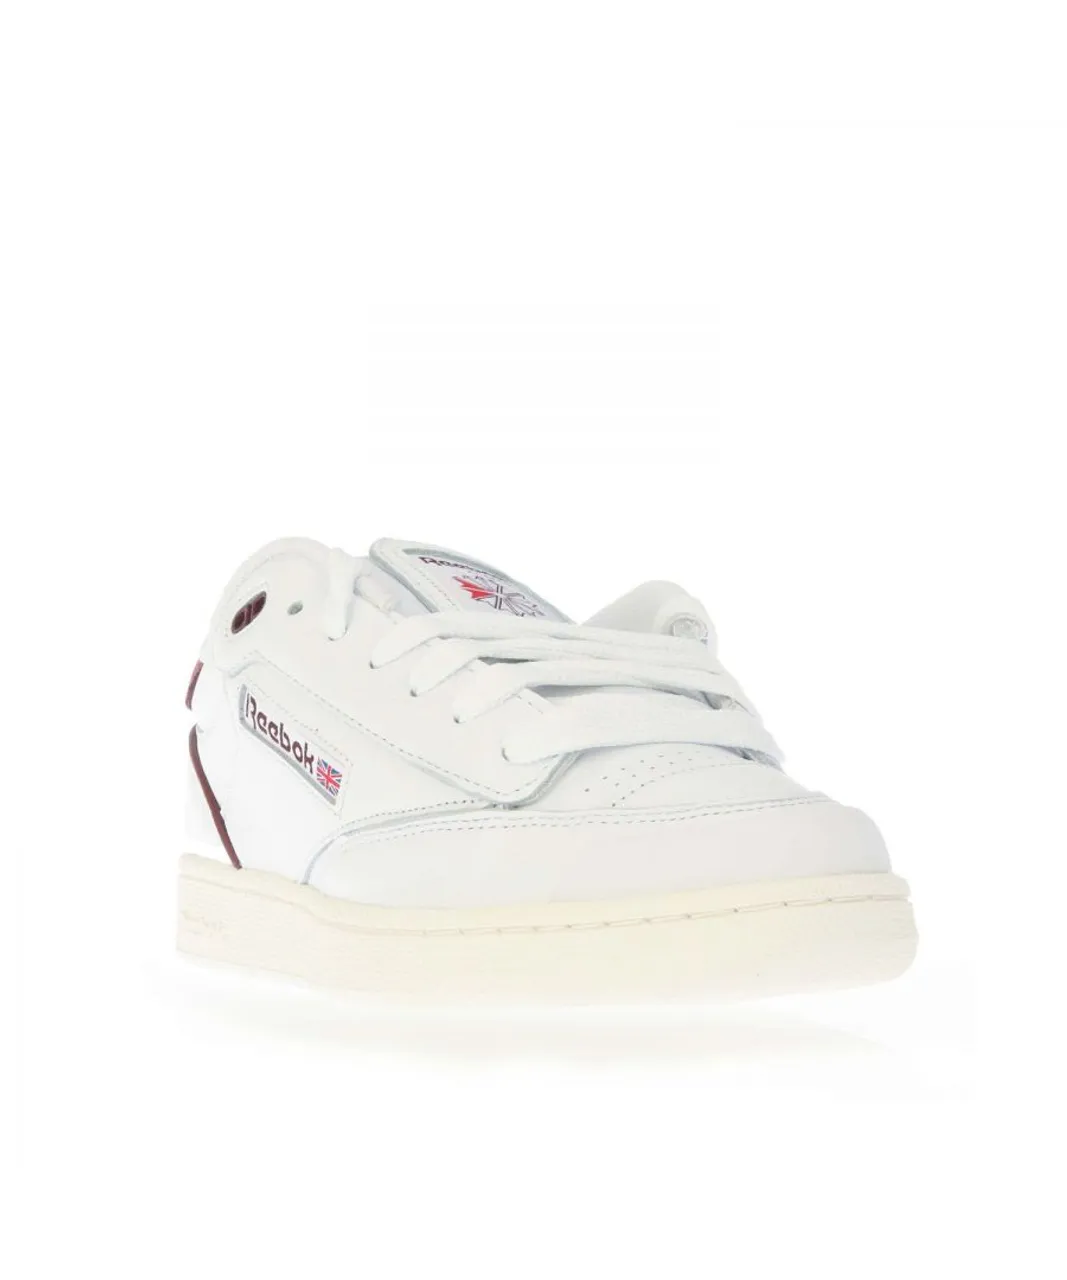 Reebok Mens Classics Club C Bulc Trainers in White Leather (archived)